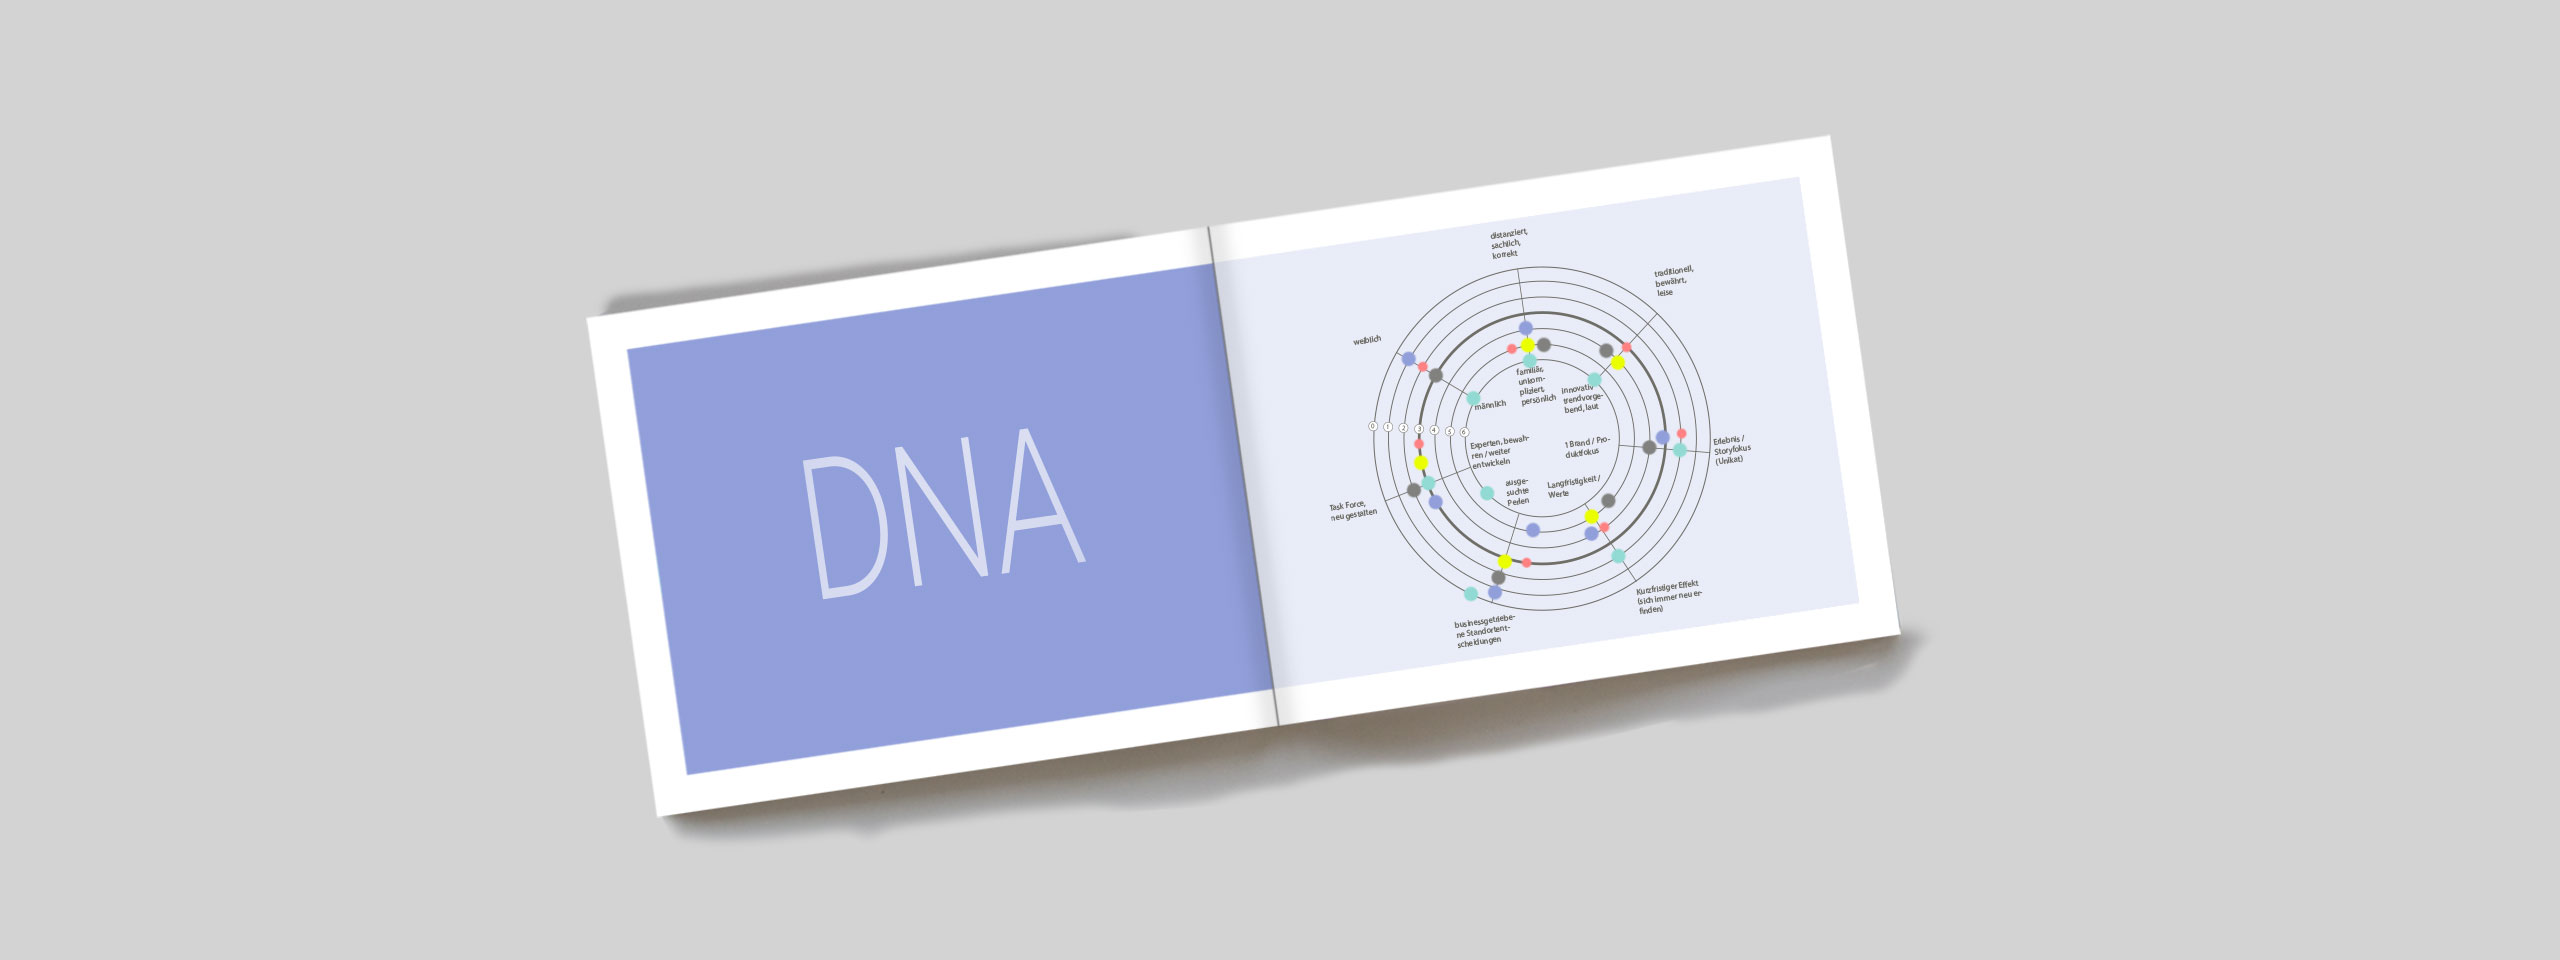 00 Teaser milani design consulting agency DNA Analyse